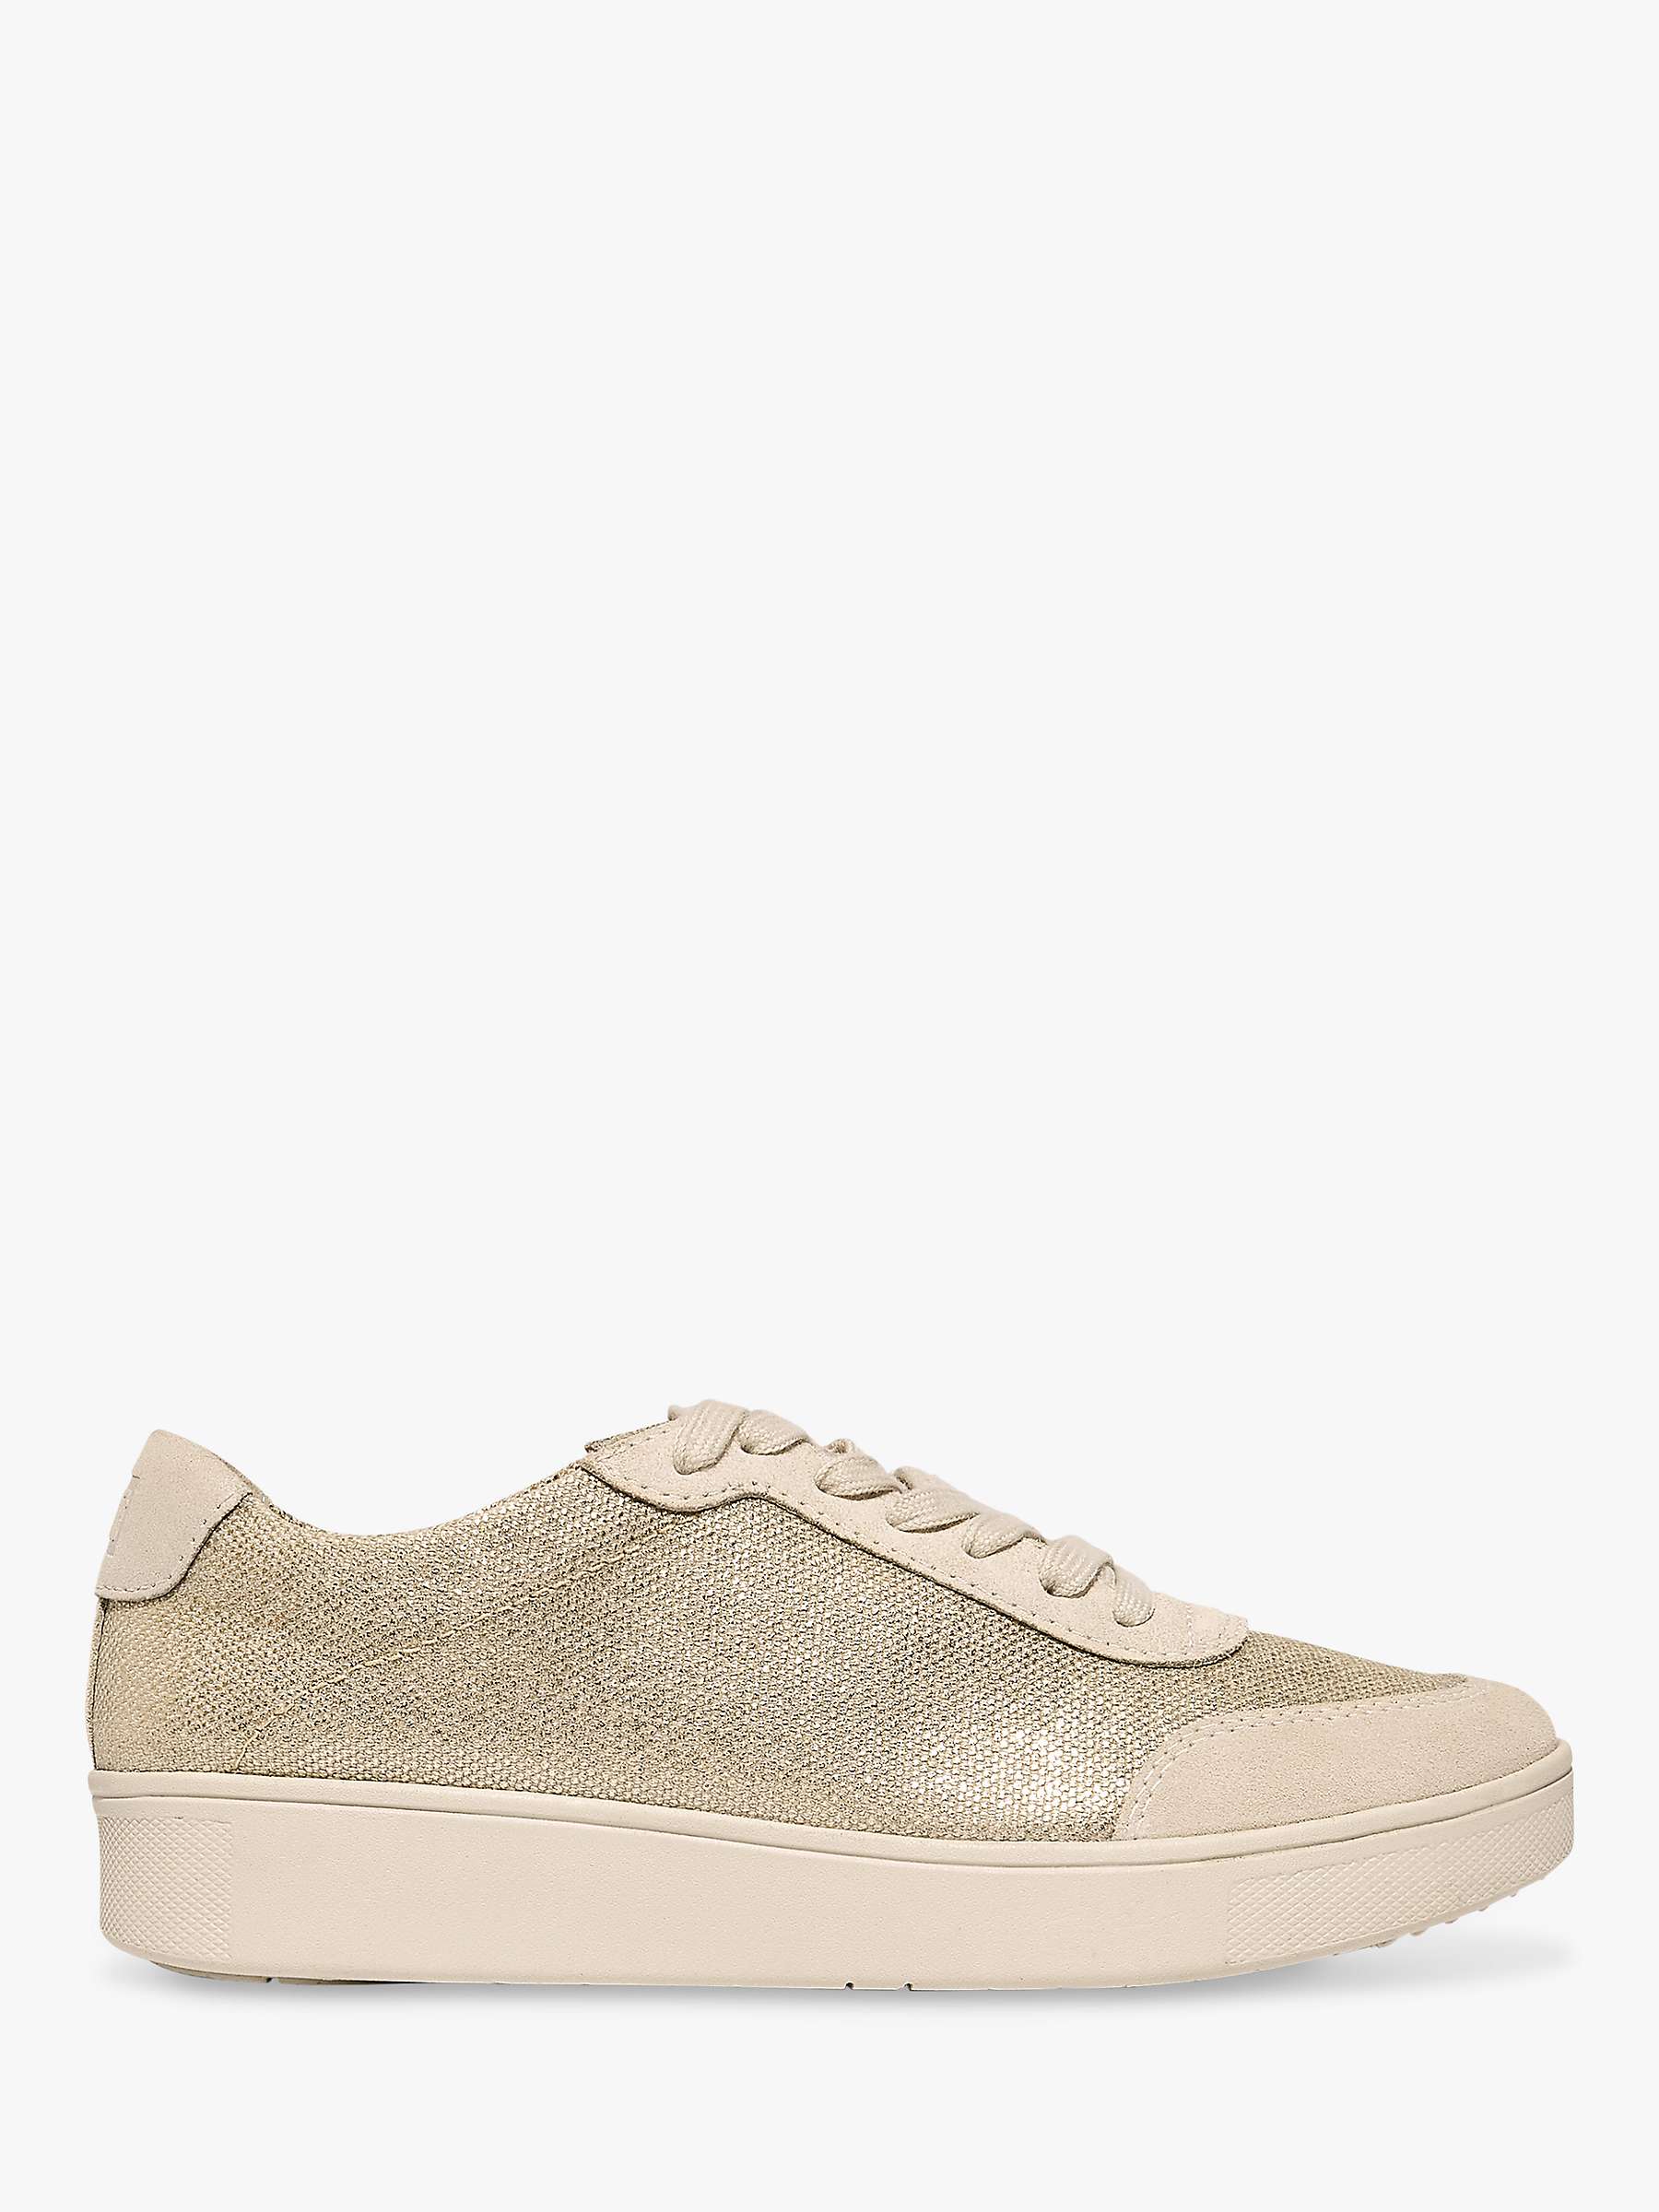 Buy FitFlop Rally Metallic Leather Blend Trainers, Platino Online at johnlewis.com